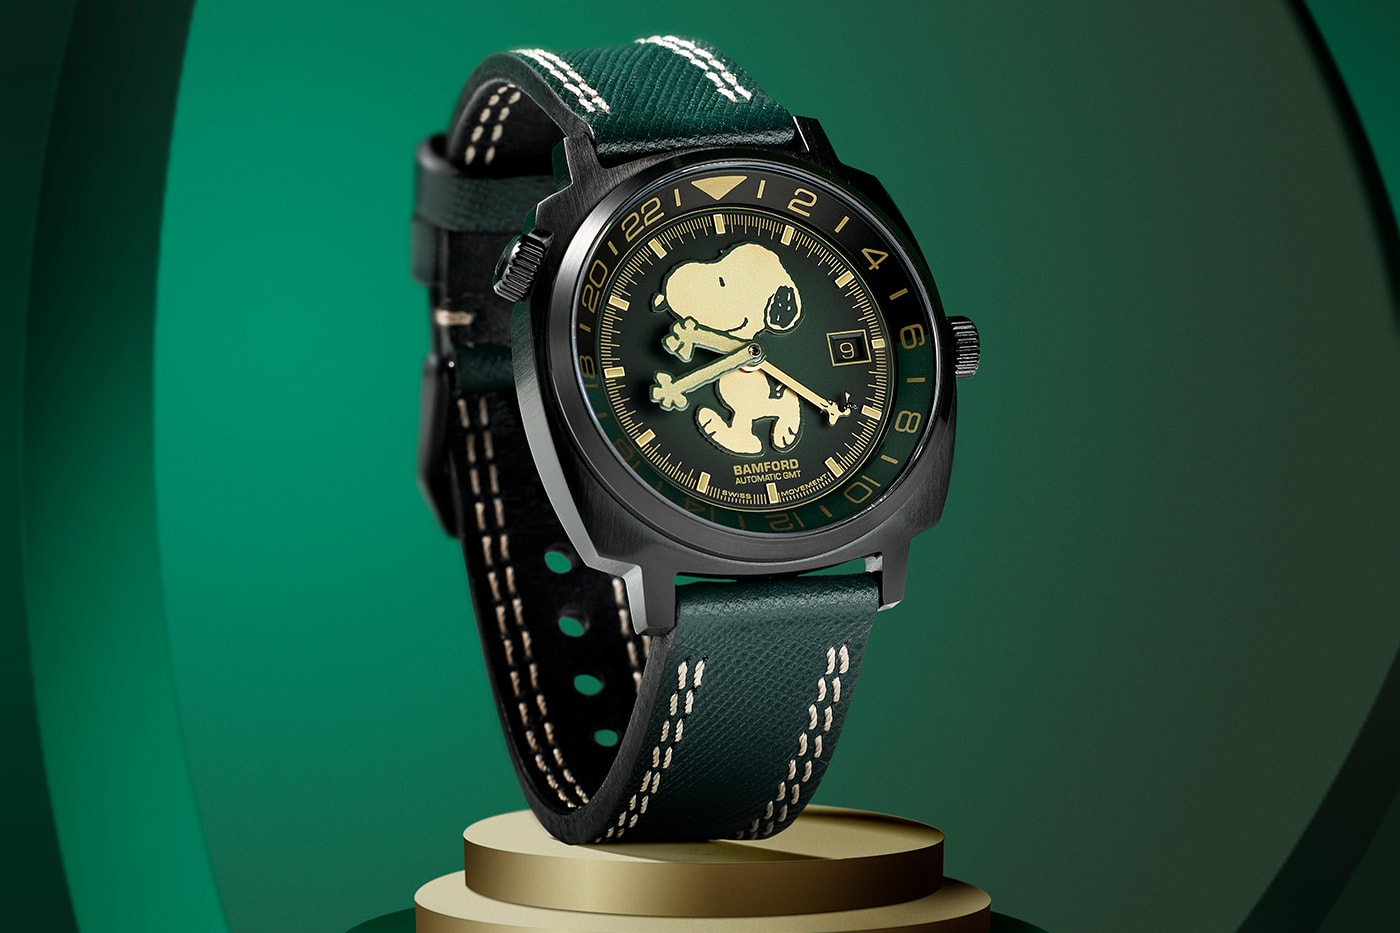 Bamford London Harrods Snoopy PVD GMT Limited-Edition Release Info